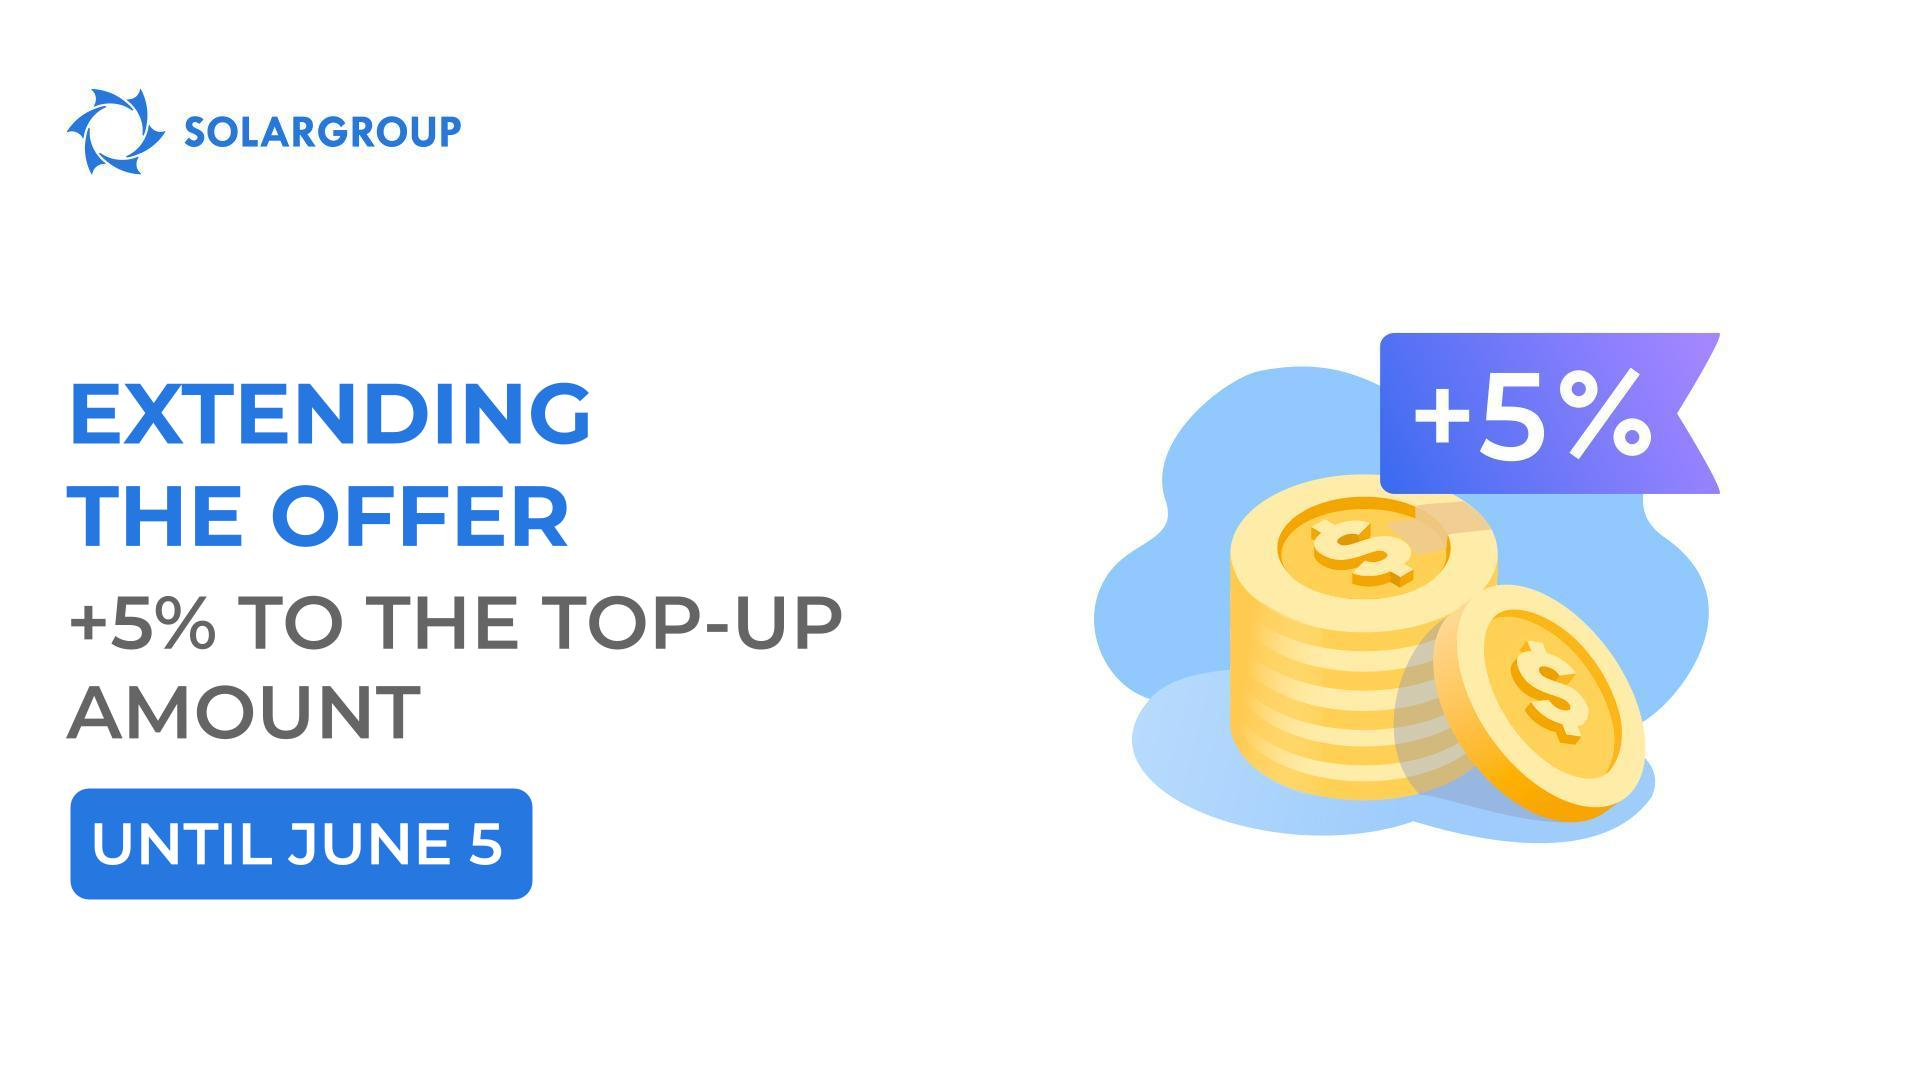 We are extending the "+5% to the top-up amount" offer until June 5